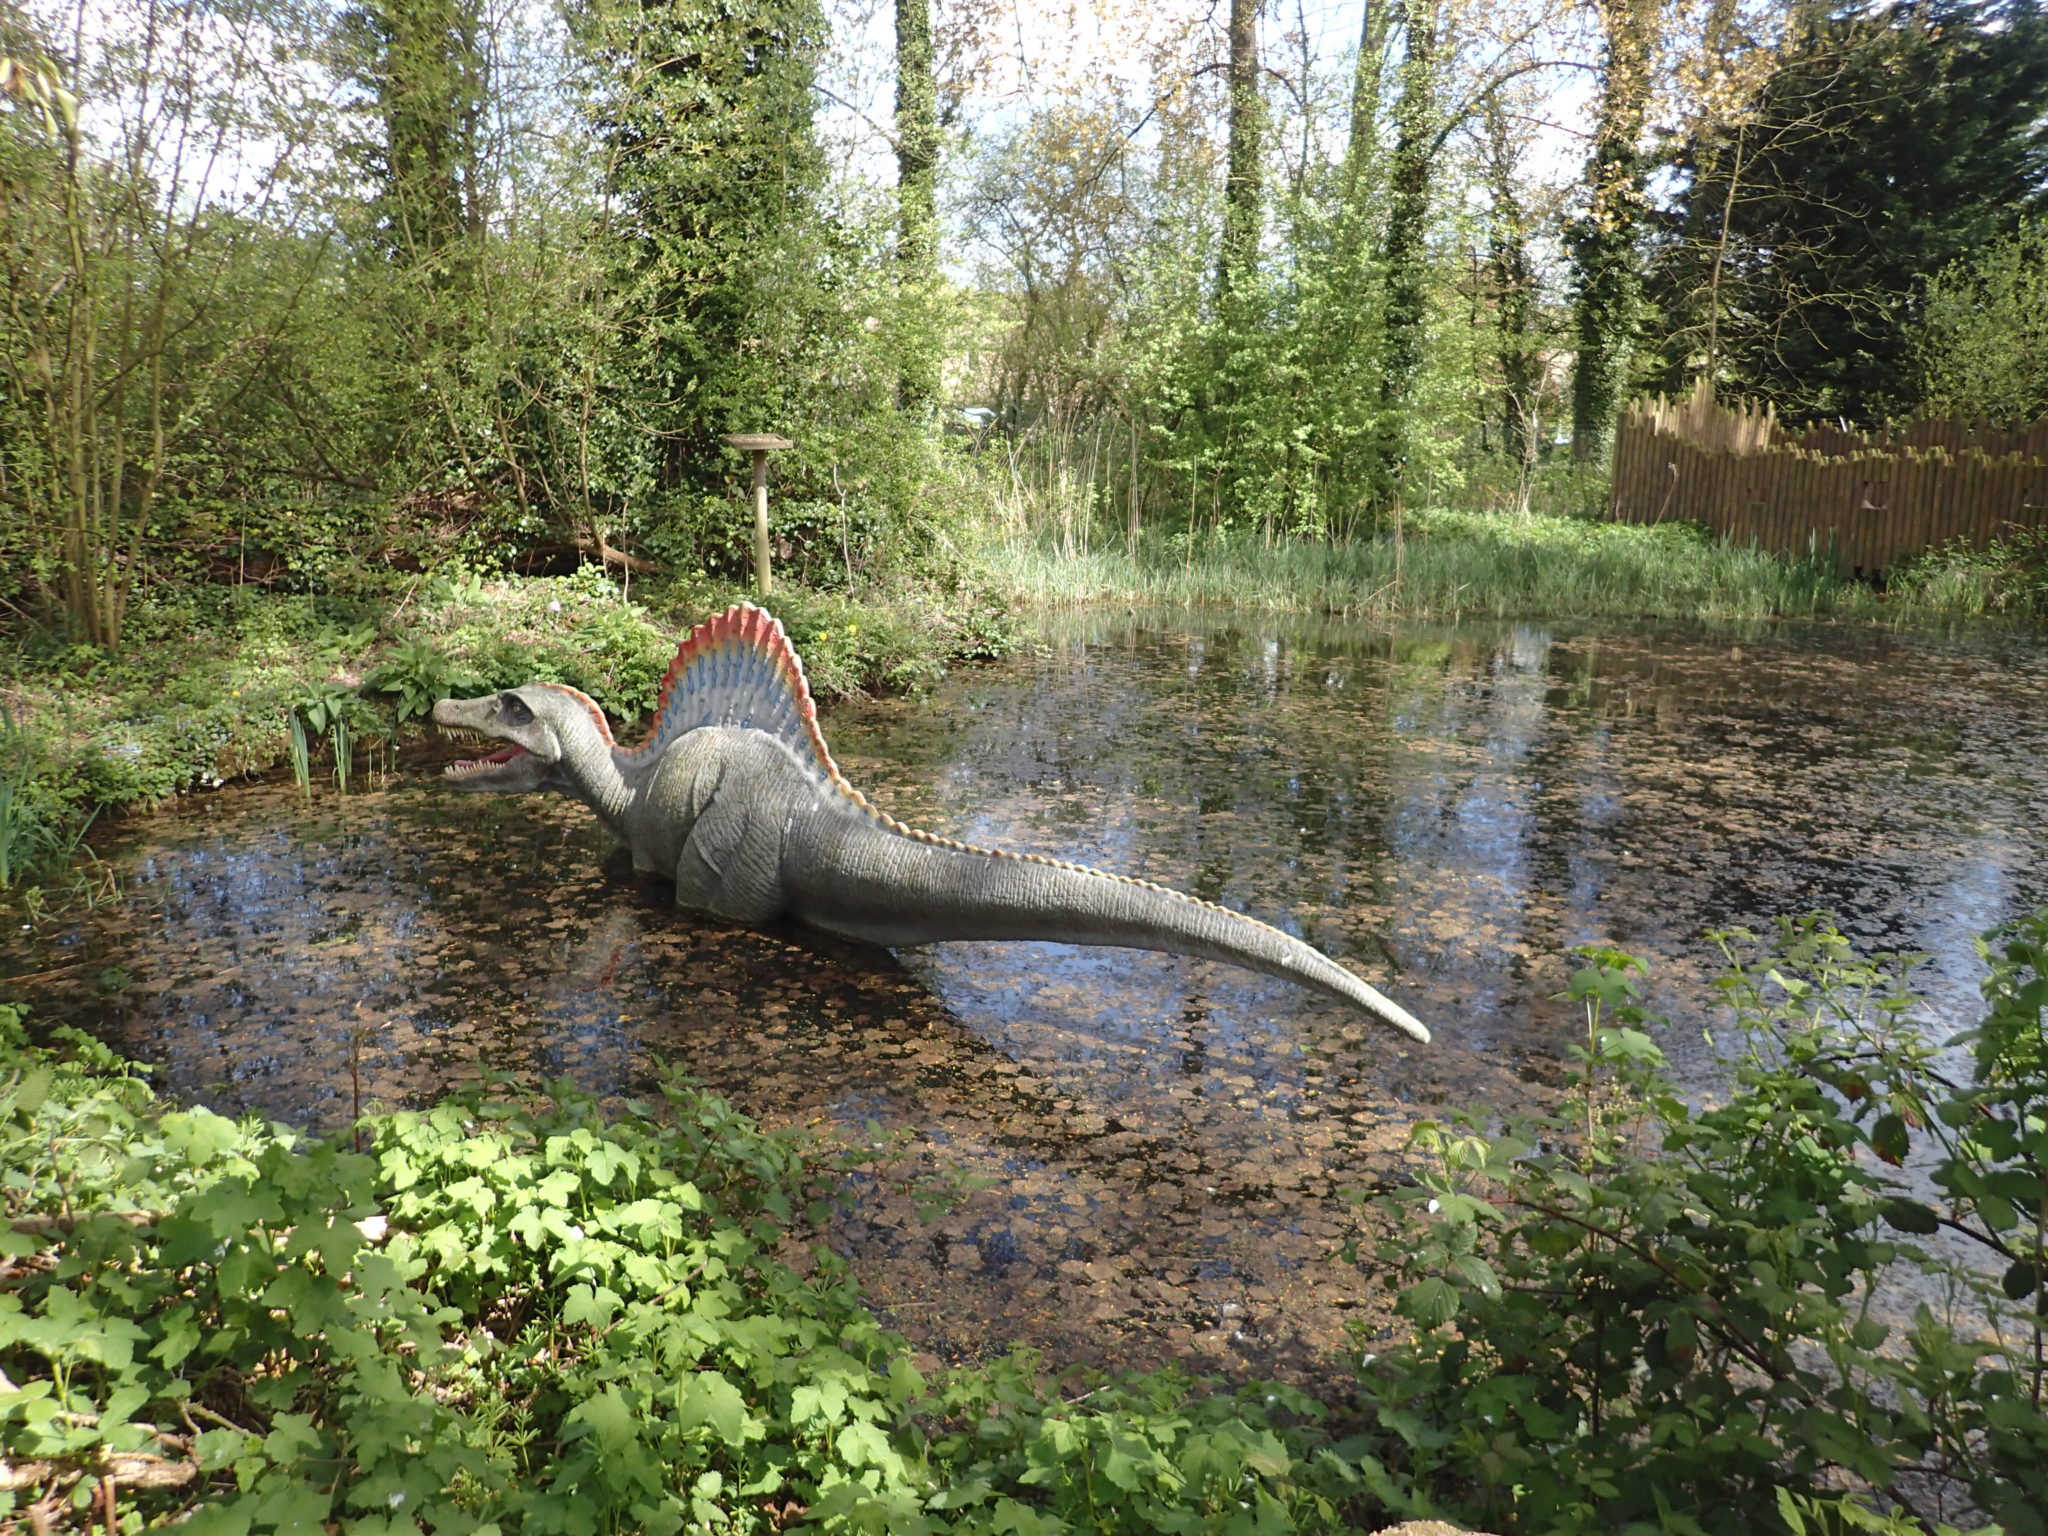 Dinosaur at Jurassic Journey, Birdland, Great Cotswolds Day Out with the Kids